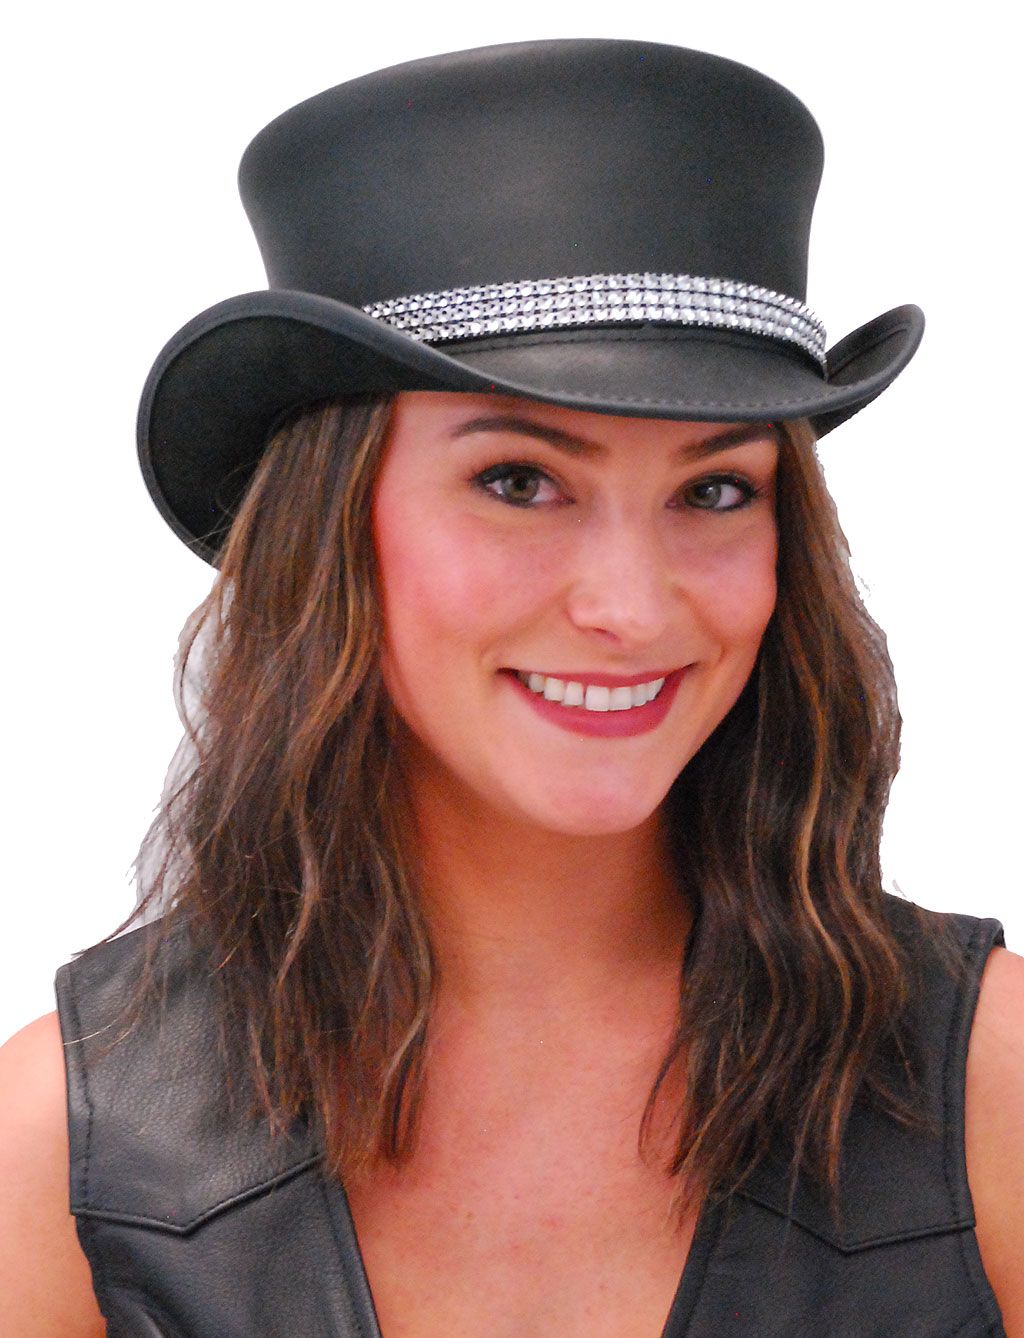 Lady rider wearing a leather top hat with bling band